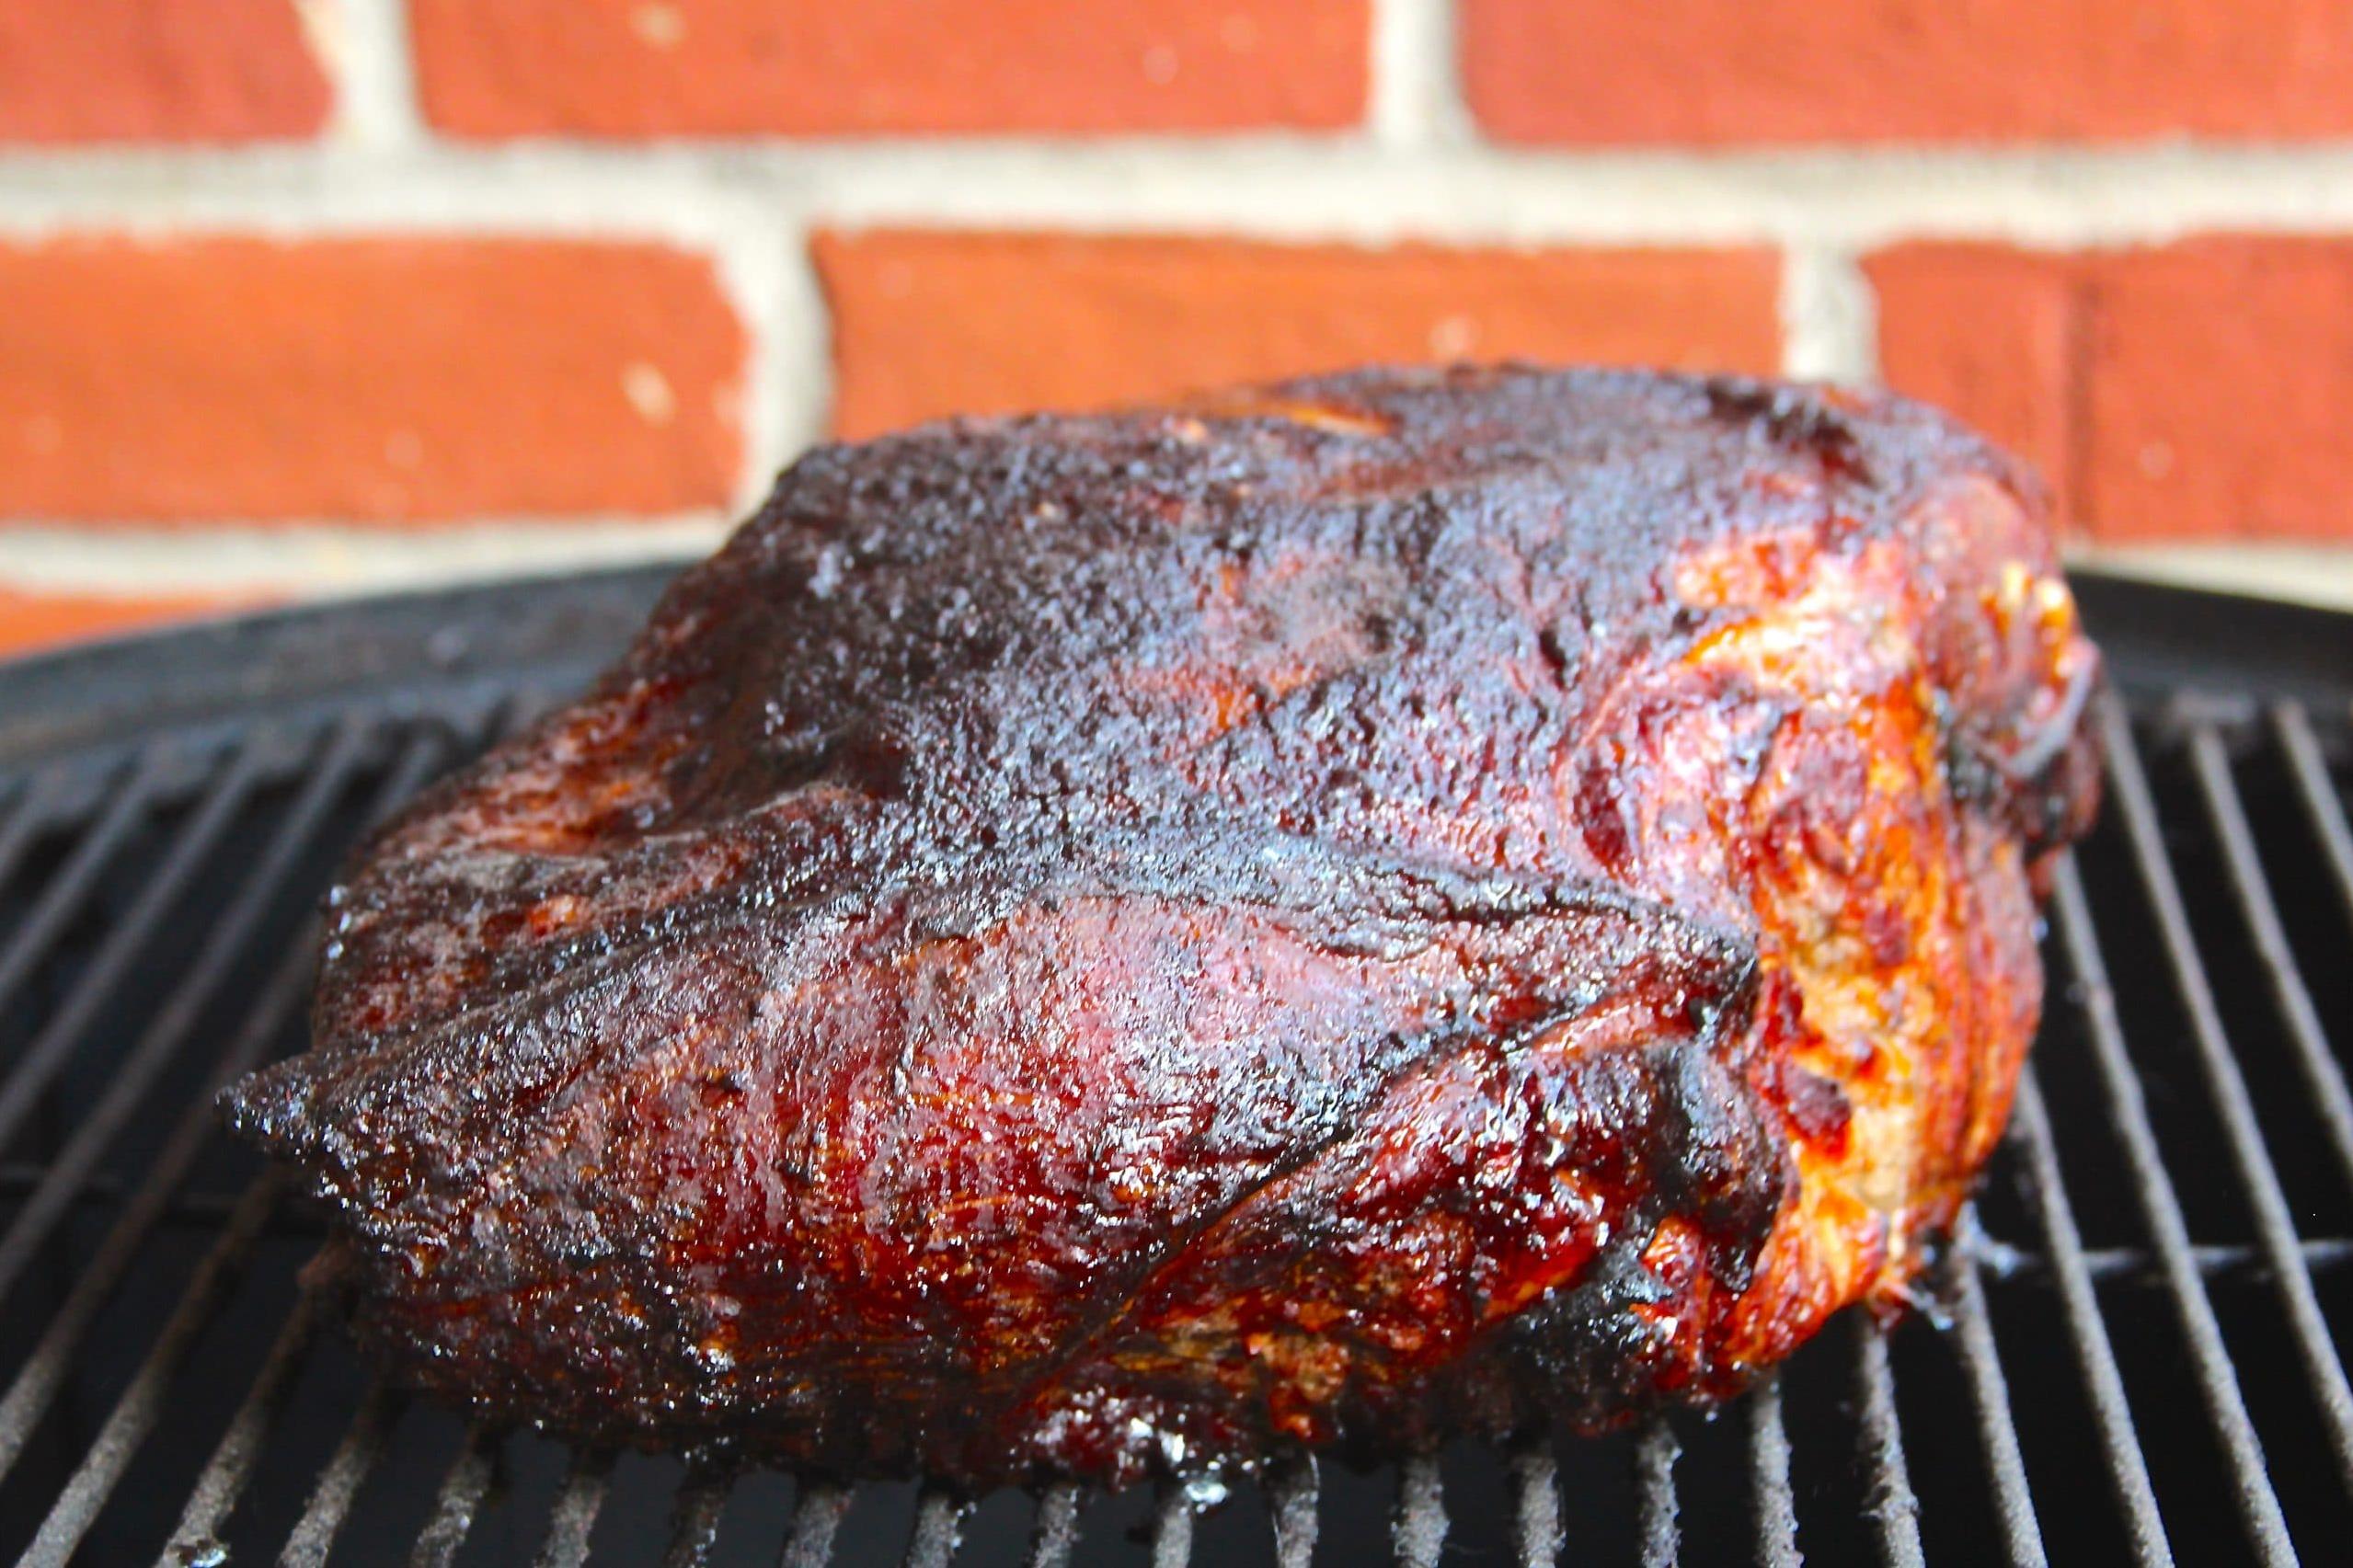  The secret to achieving that perfectly charred, caramelized exterior is all in the rub.